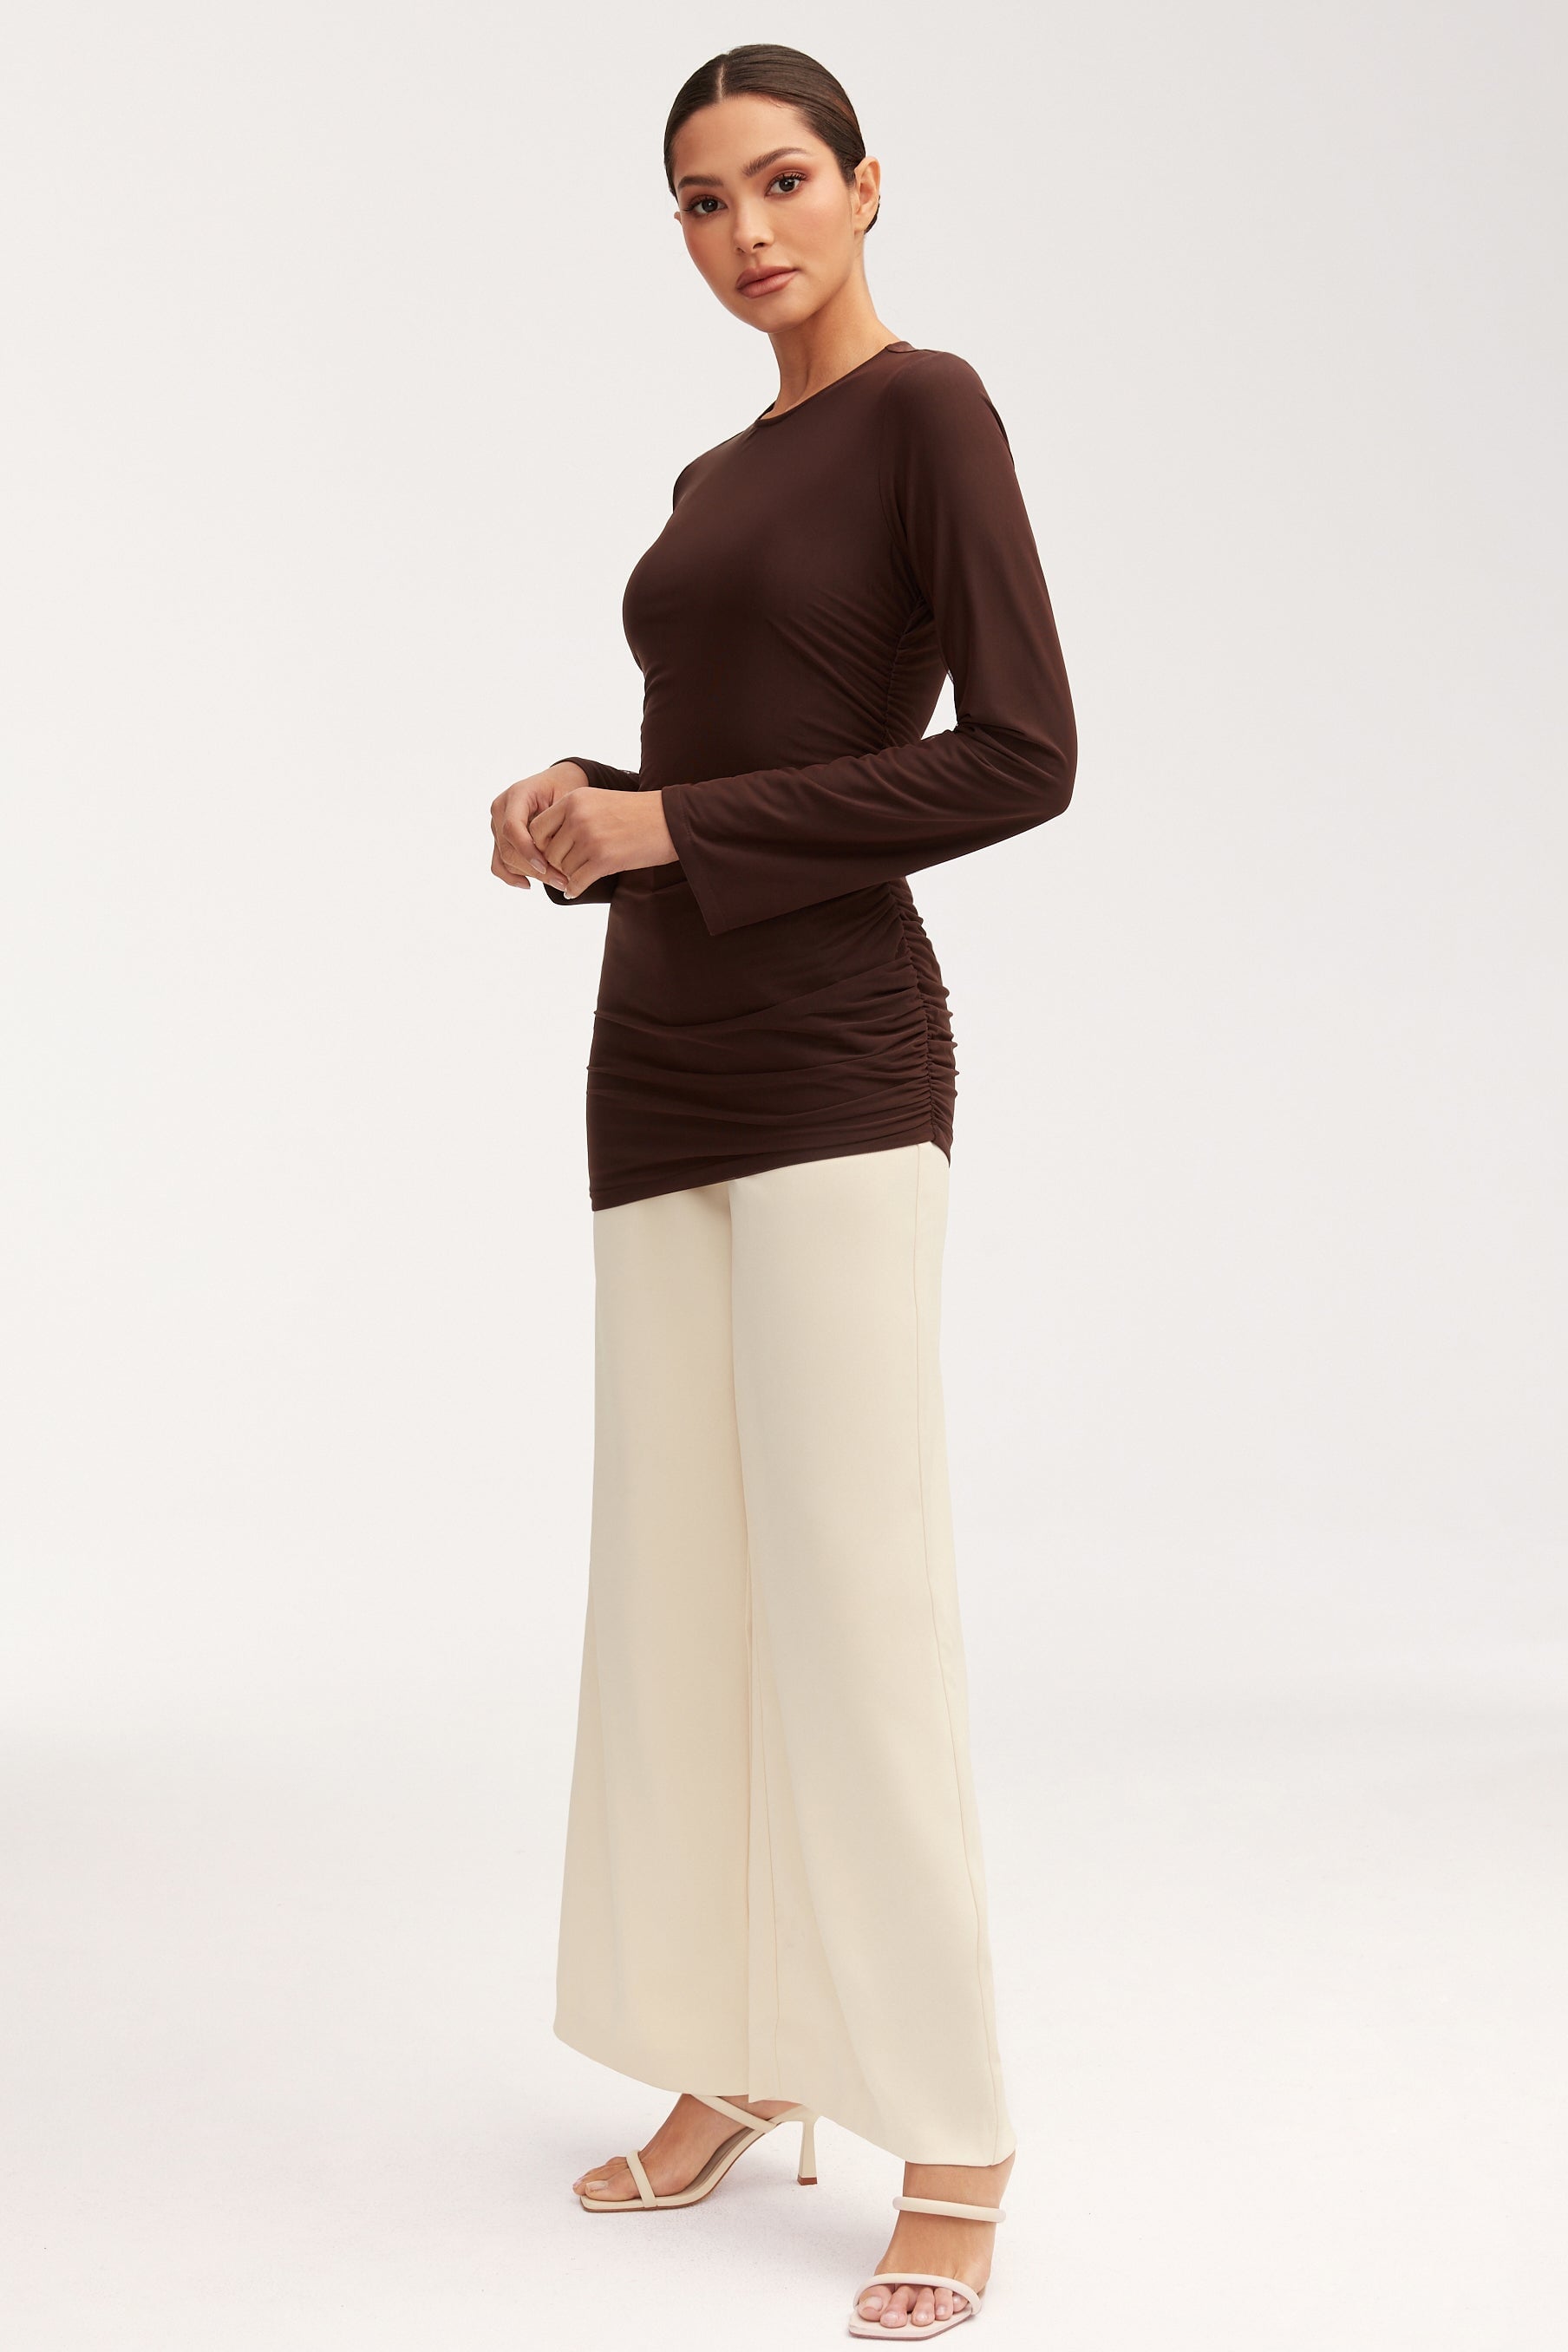 Mesh Rouched Top - Chocolate Plum Tops Veiled 